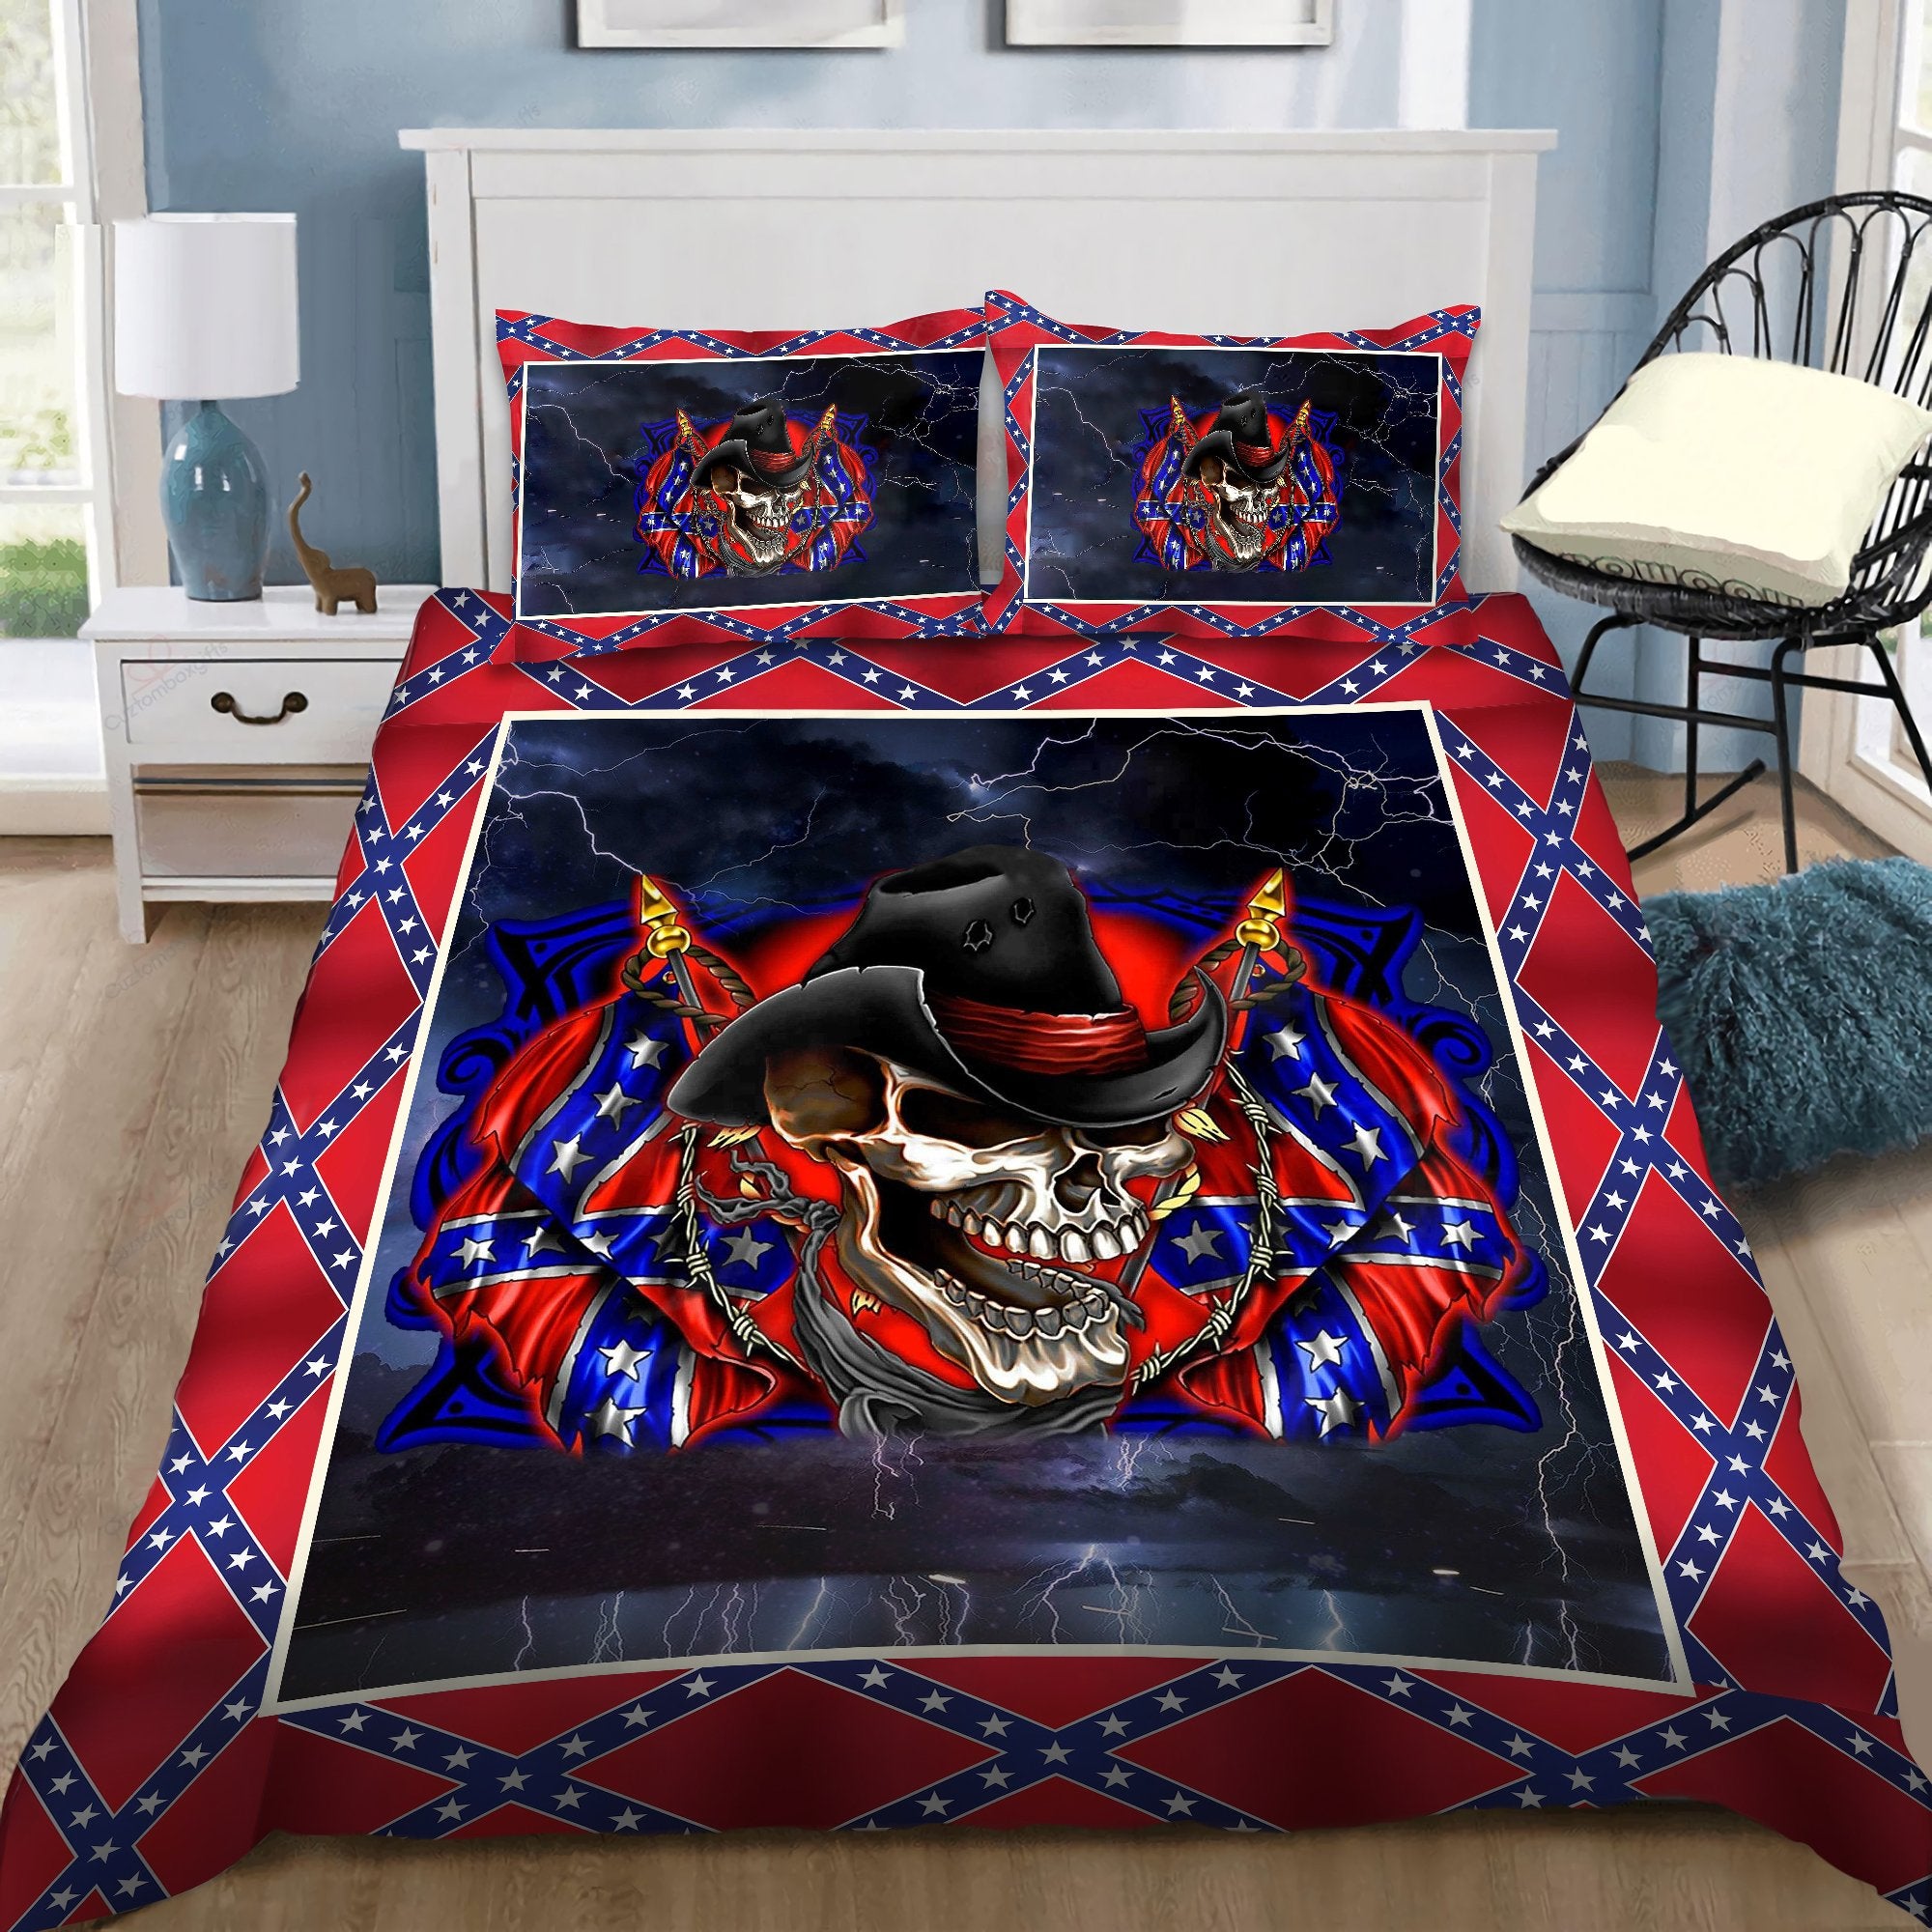 3D Love skull red neck bedding set DQB07142013-Bedding-PL8386-Twin-Vibe Cosy™